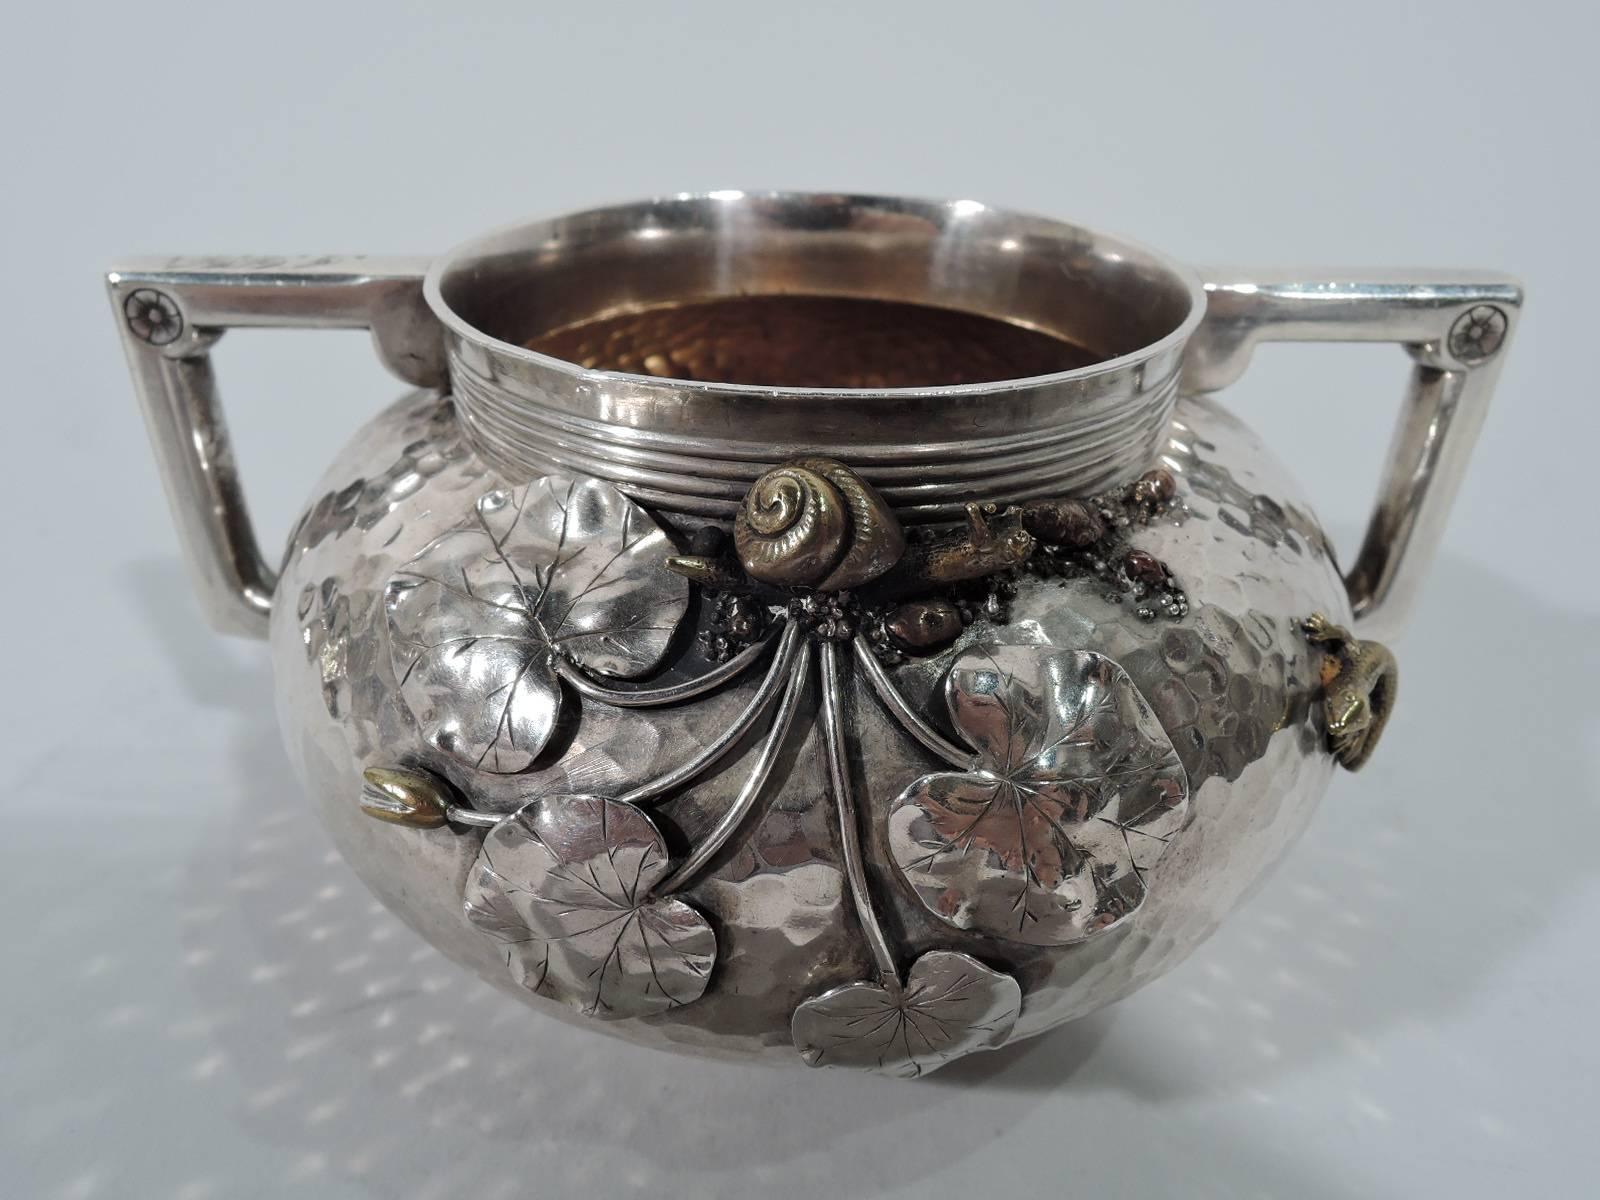 Gorham Japonesque Hand-Hammered Sterling Silver and Mixed Metal Tea Set 3